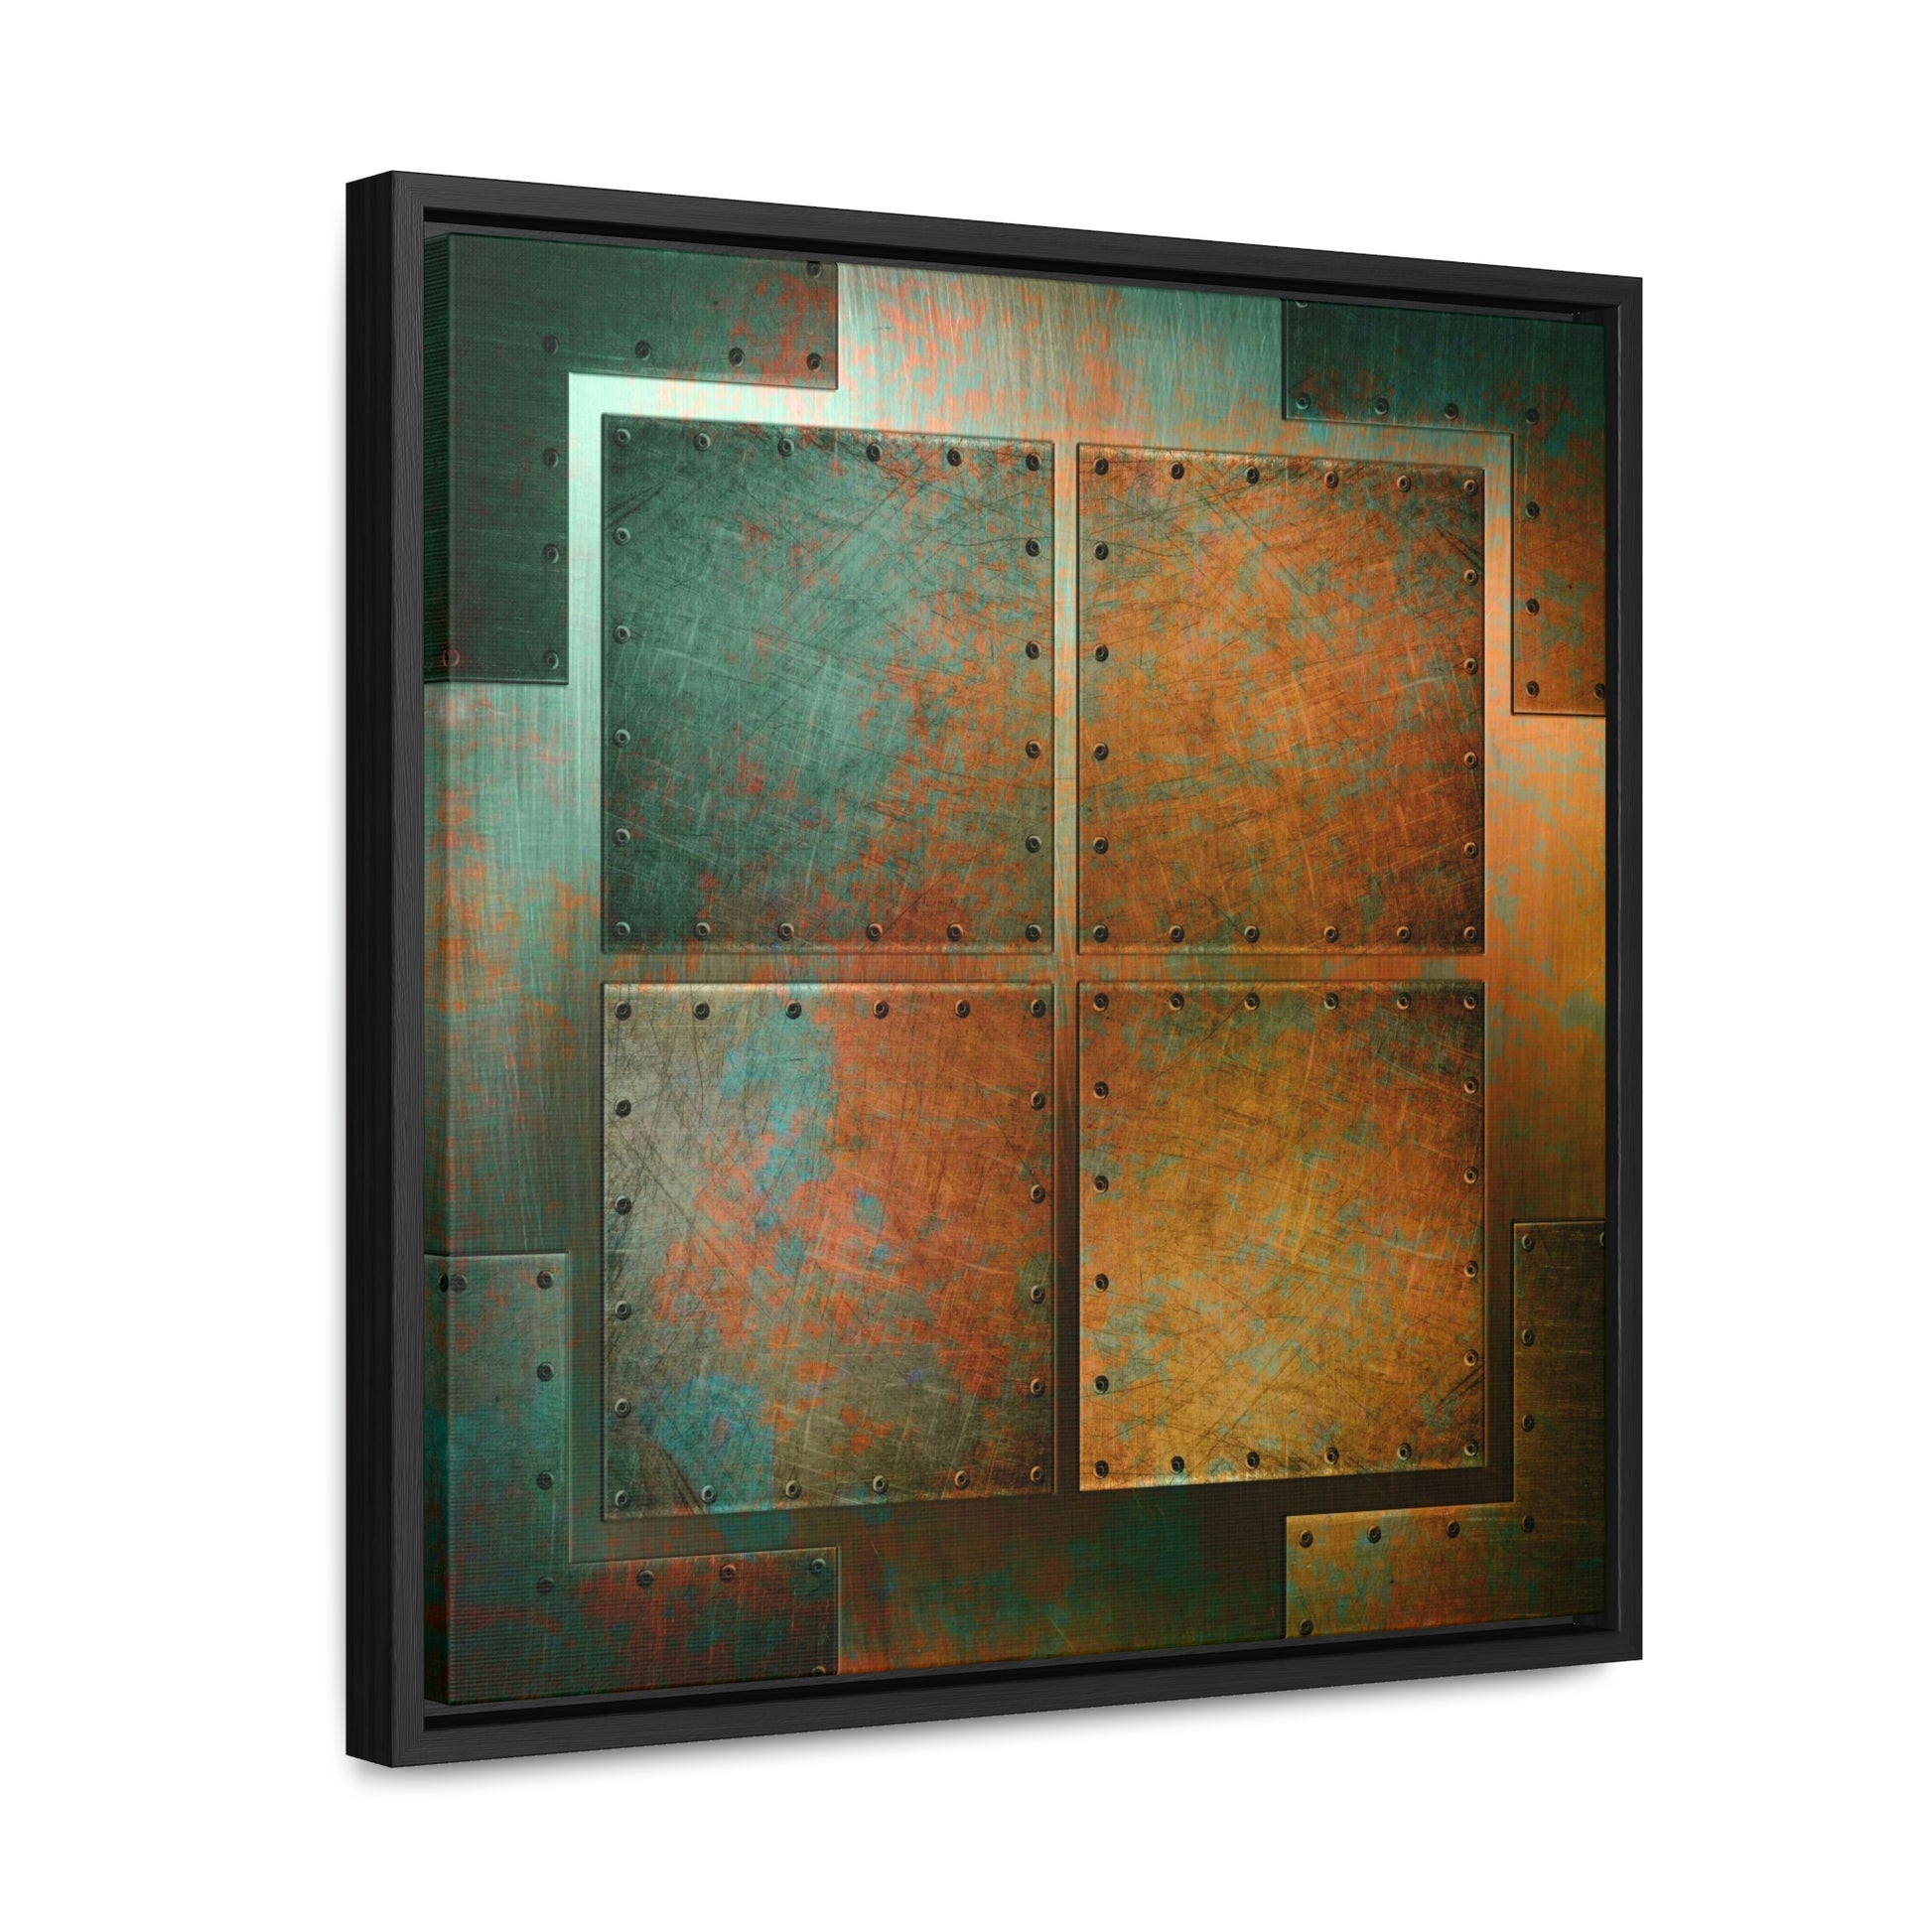 Steampunk Themed Wall Decor - Patinated, Riveted Copper Sheets Print on Canvas in a Floating Frame side view